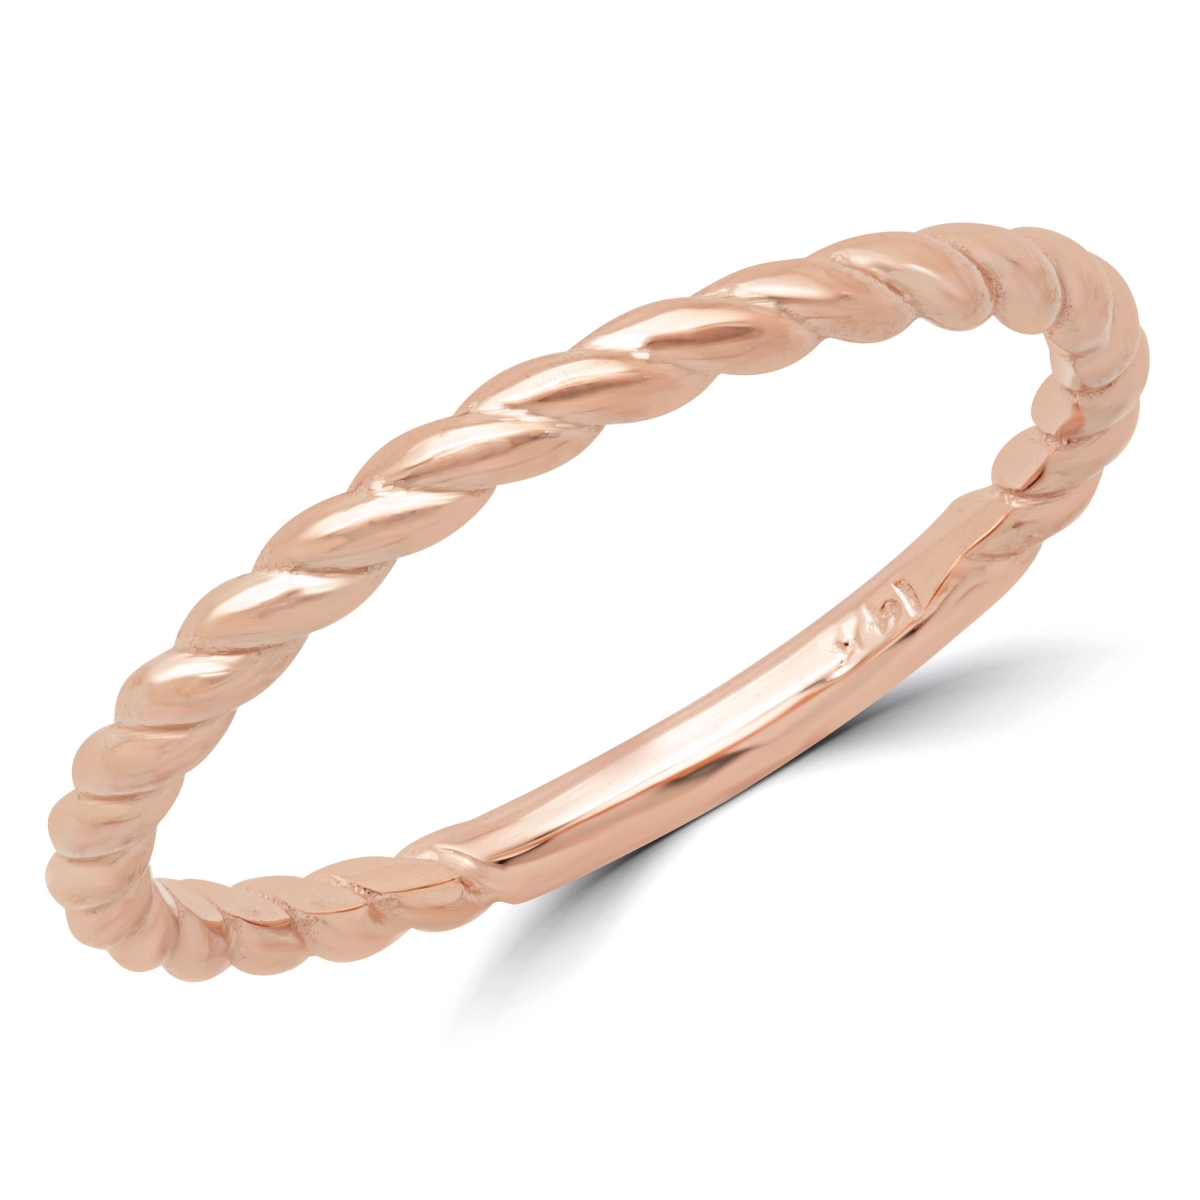 Picture of Majesty Diamonds MD180603-6.25 Braided Rope Classic Wedding Band Ring in 14K Rose Gold - Size 6.25